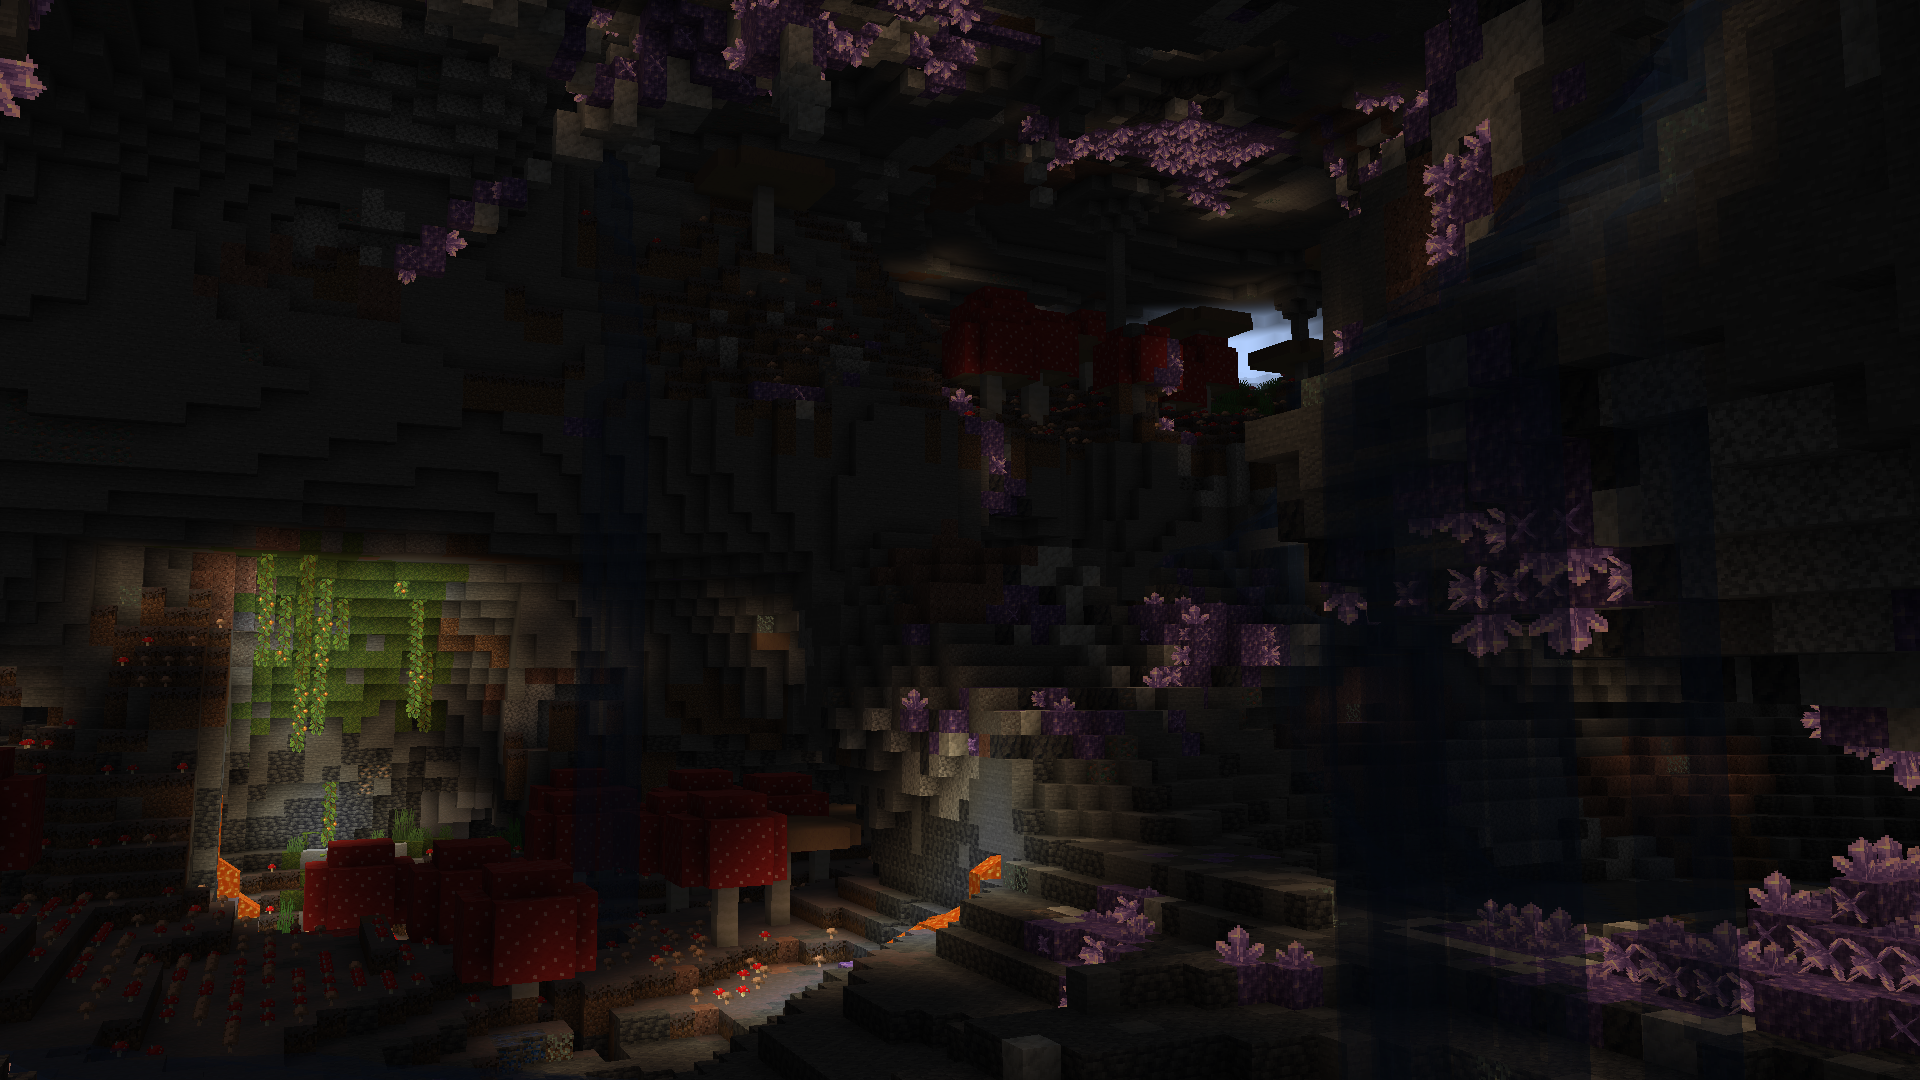 Amethyst Caves + Mushroom Caves without Night Vision